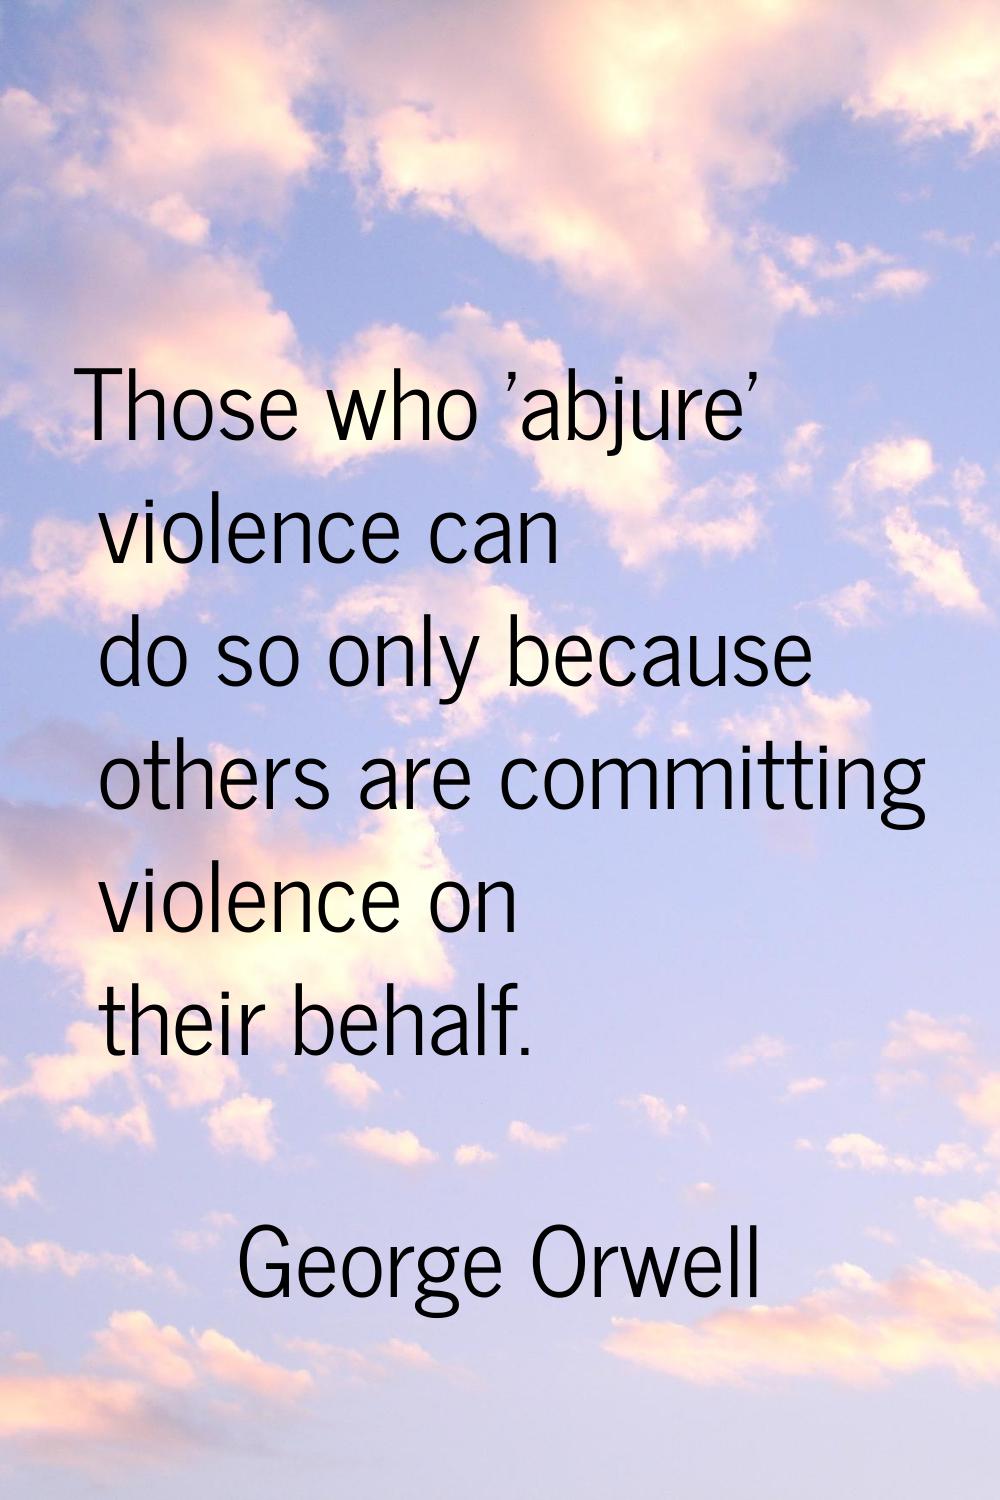 Those who 'abjure' violence can do so only because others are committing violence on their behalf.